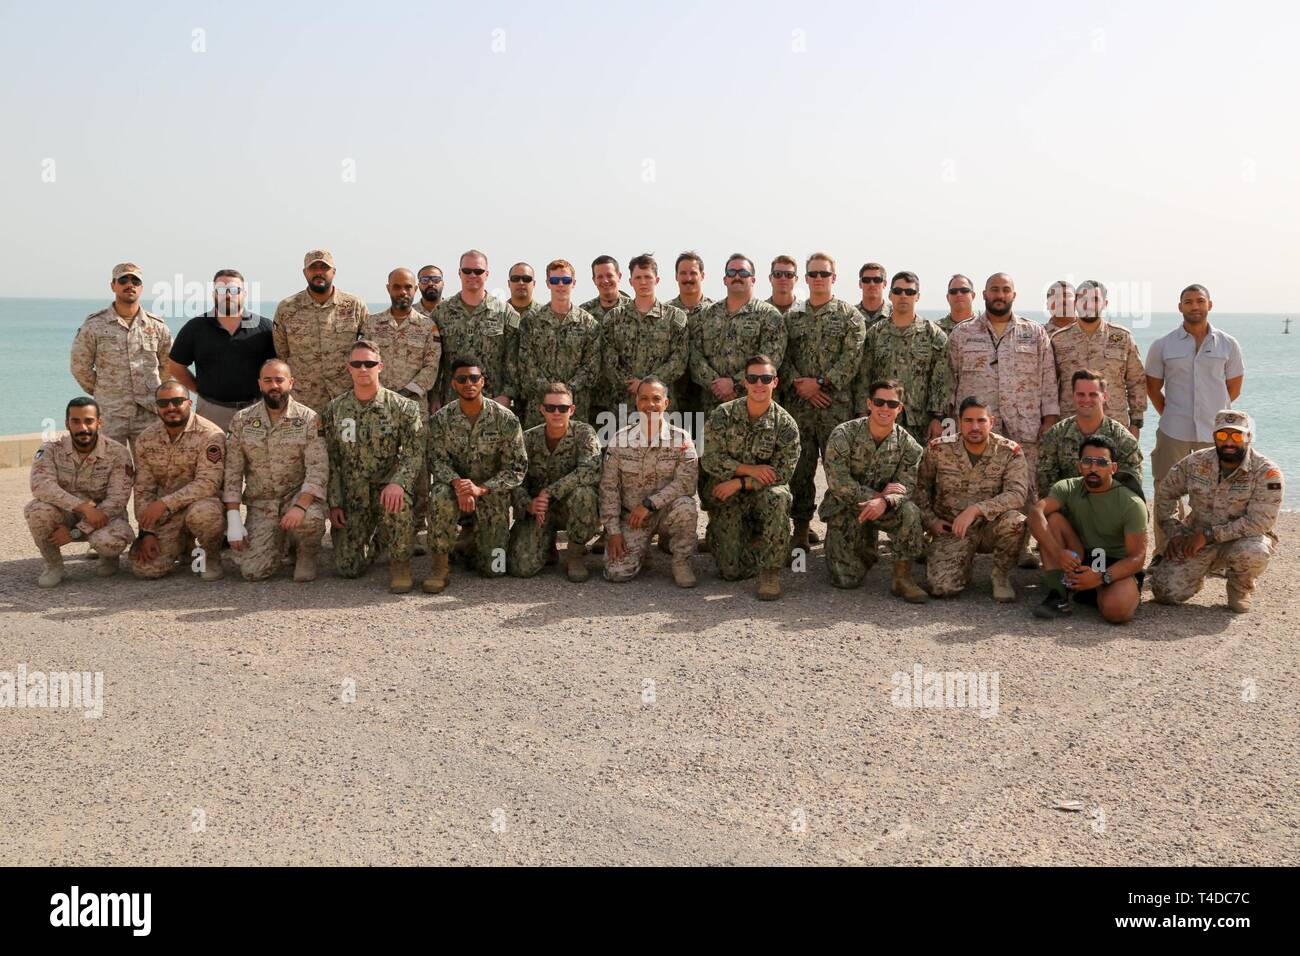 KUWAIT (March. 18, 2019) U.S. Navy personnel and members of the Kuwait Naval Forces take a group photo during exercise Eager Response 19. Eager Response 19 is a bilateral explosive ordnance and mine countermeasures exercise between the U.S. Navy and the Kuwait Navel Forces, allowing both nations to share knowledge and experiences to enhance mutual maritime capabilities and interoperability. Stock Photo